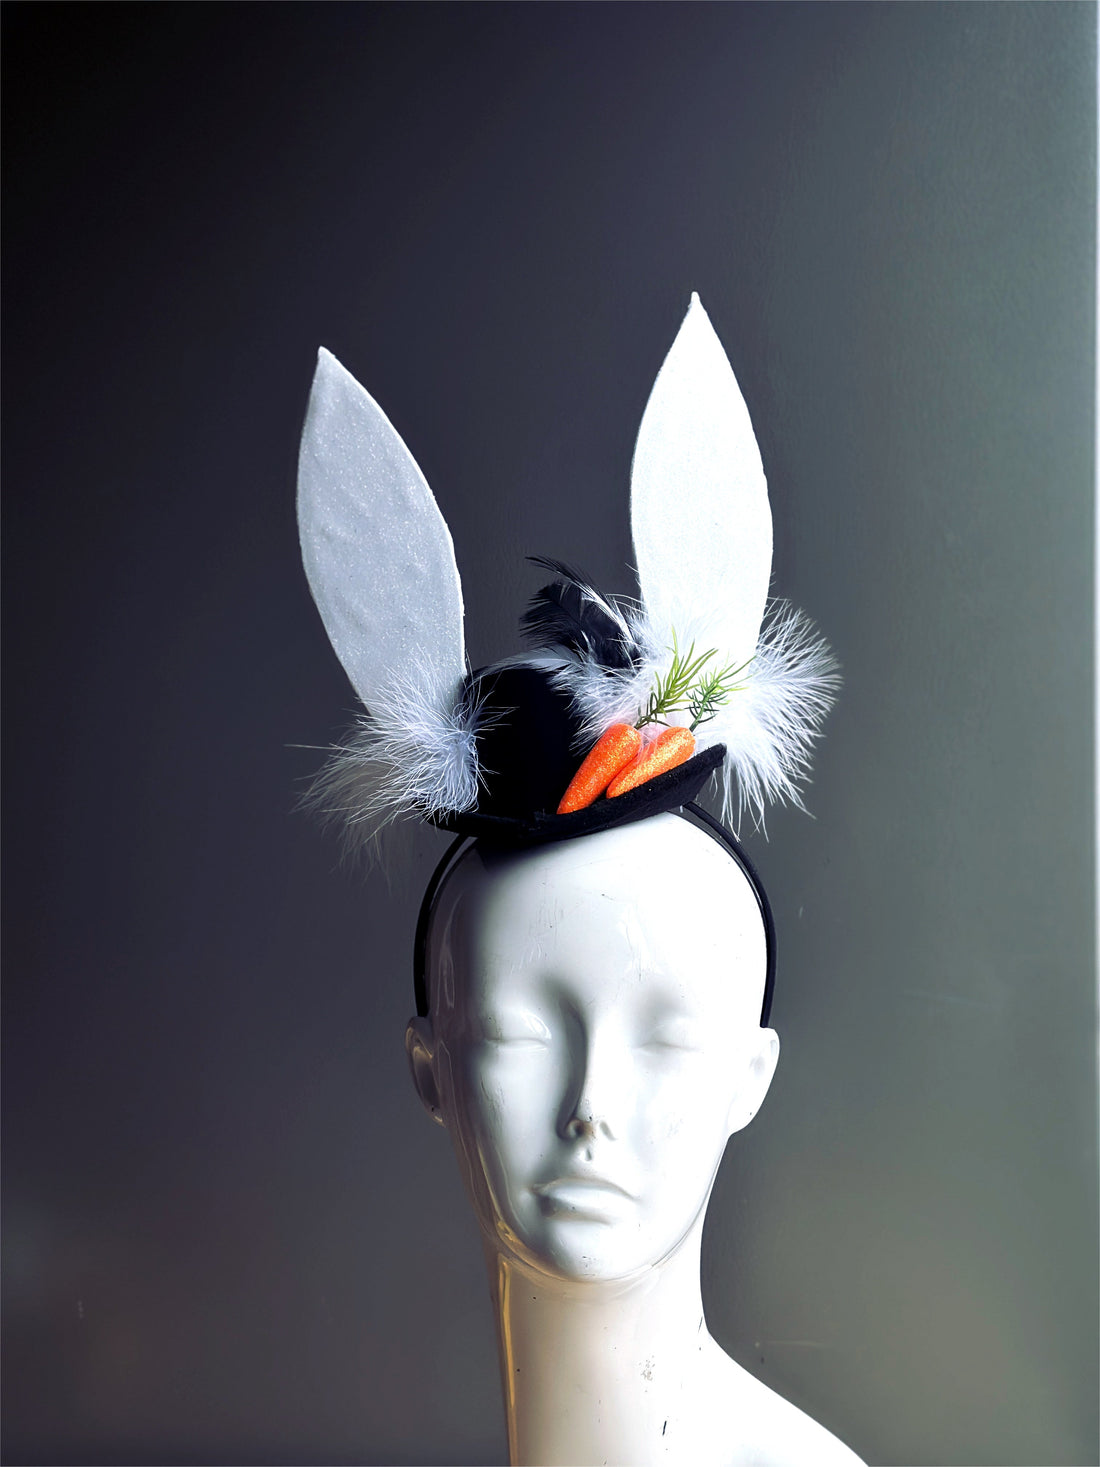 Black hat with white bunny ears, white feathers, and orange carrots.